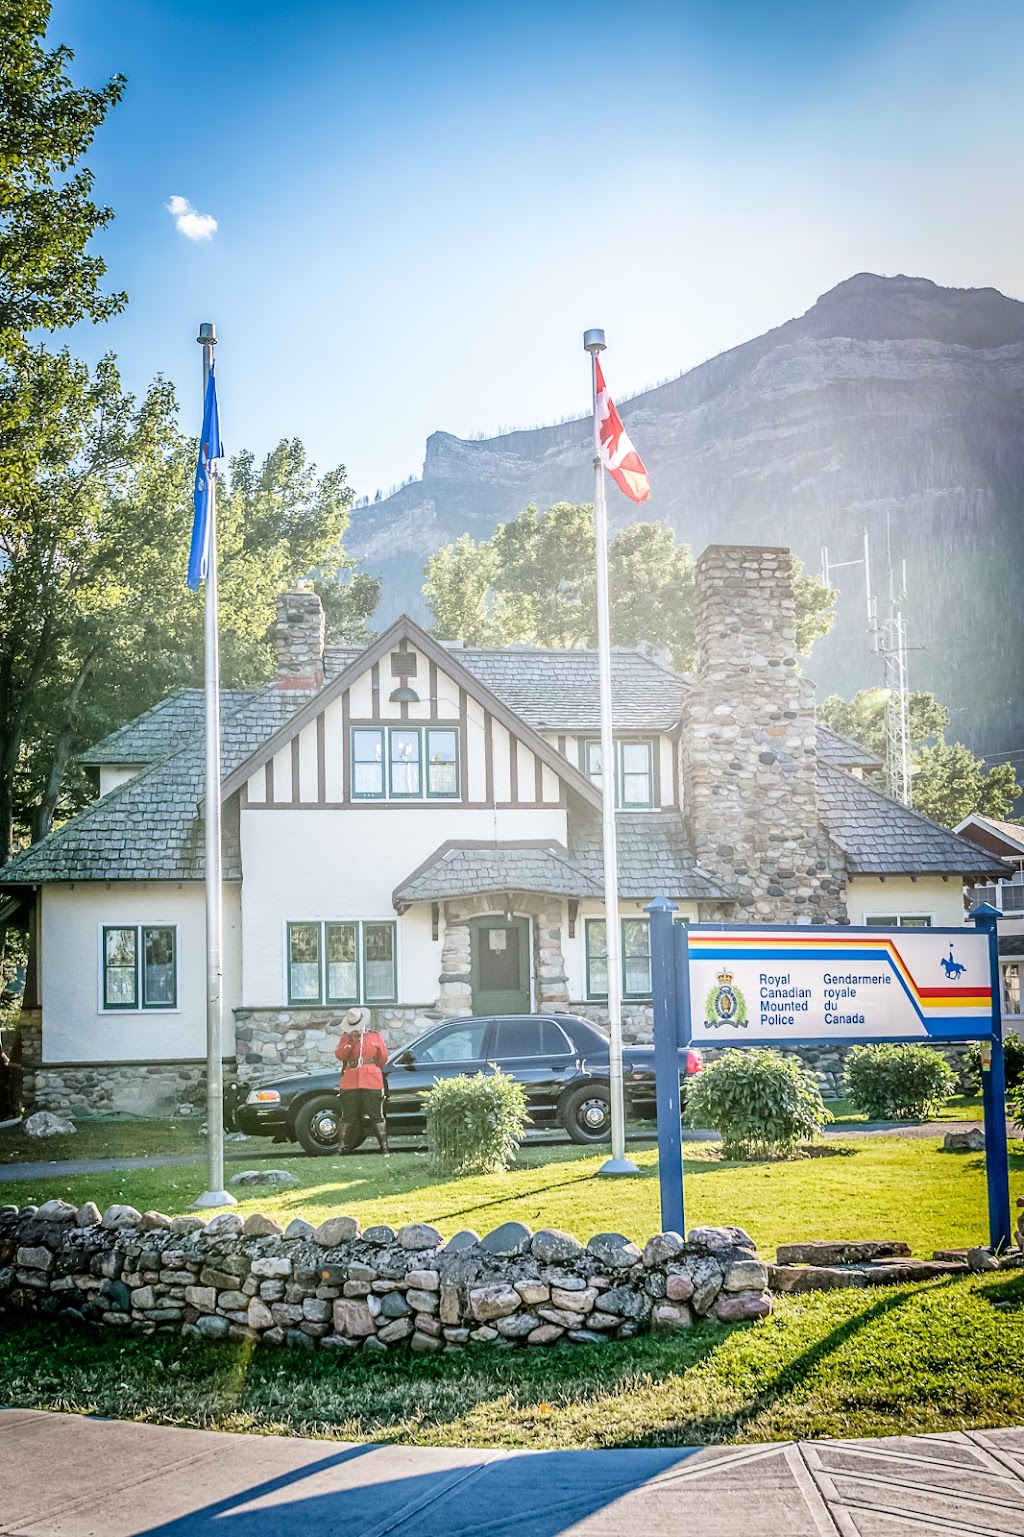 Royal Canadian Mounted Police (RCMP) | 202 Waterton Ave, Waterton Park, AB T0K 2M0, Canada | Phone: (403) 859-2044